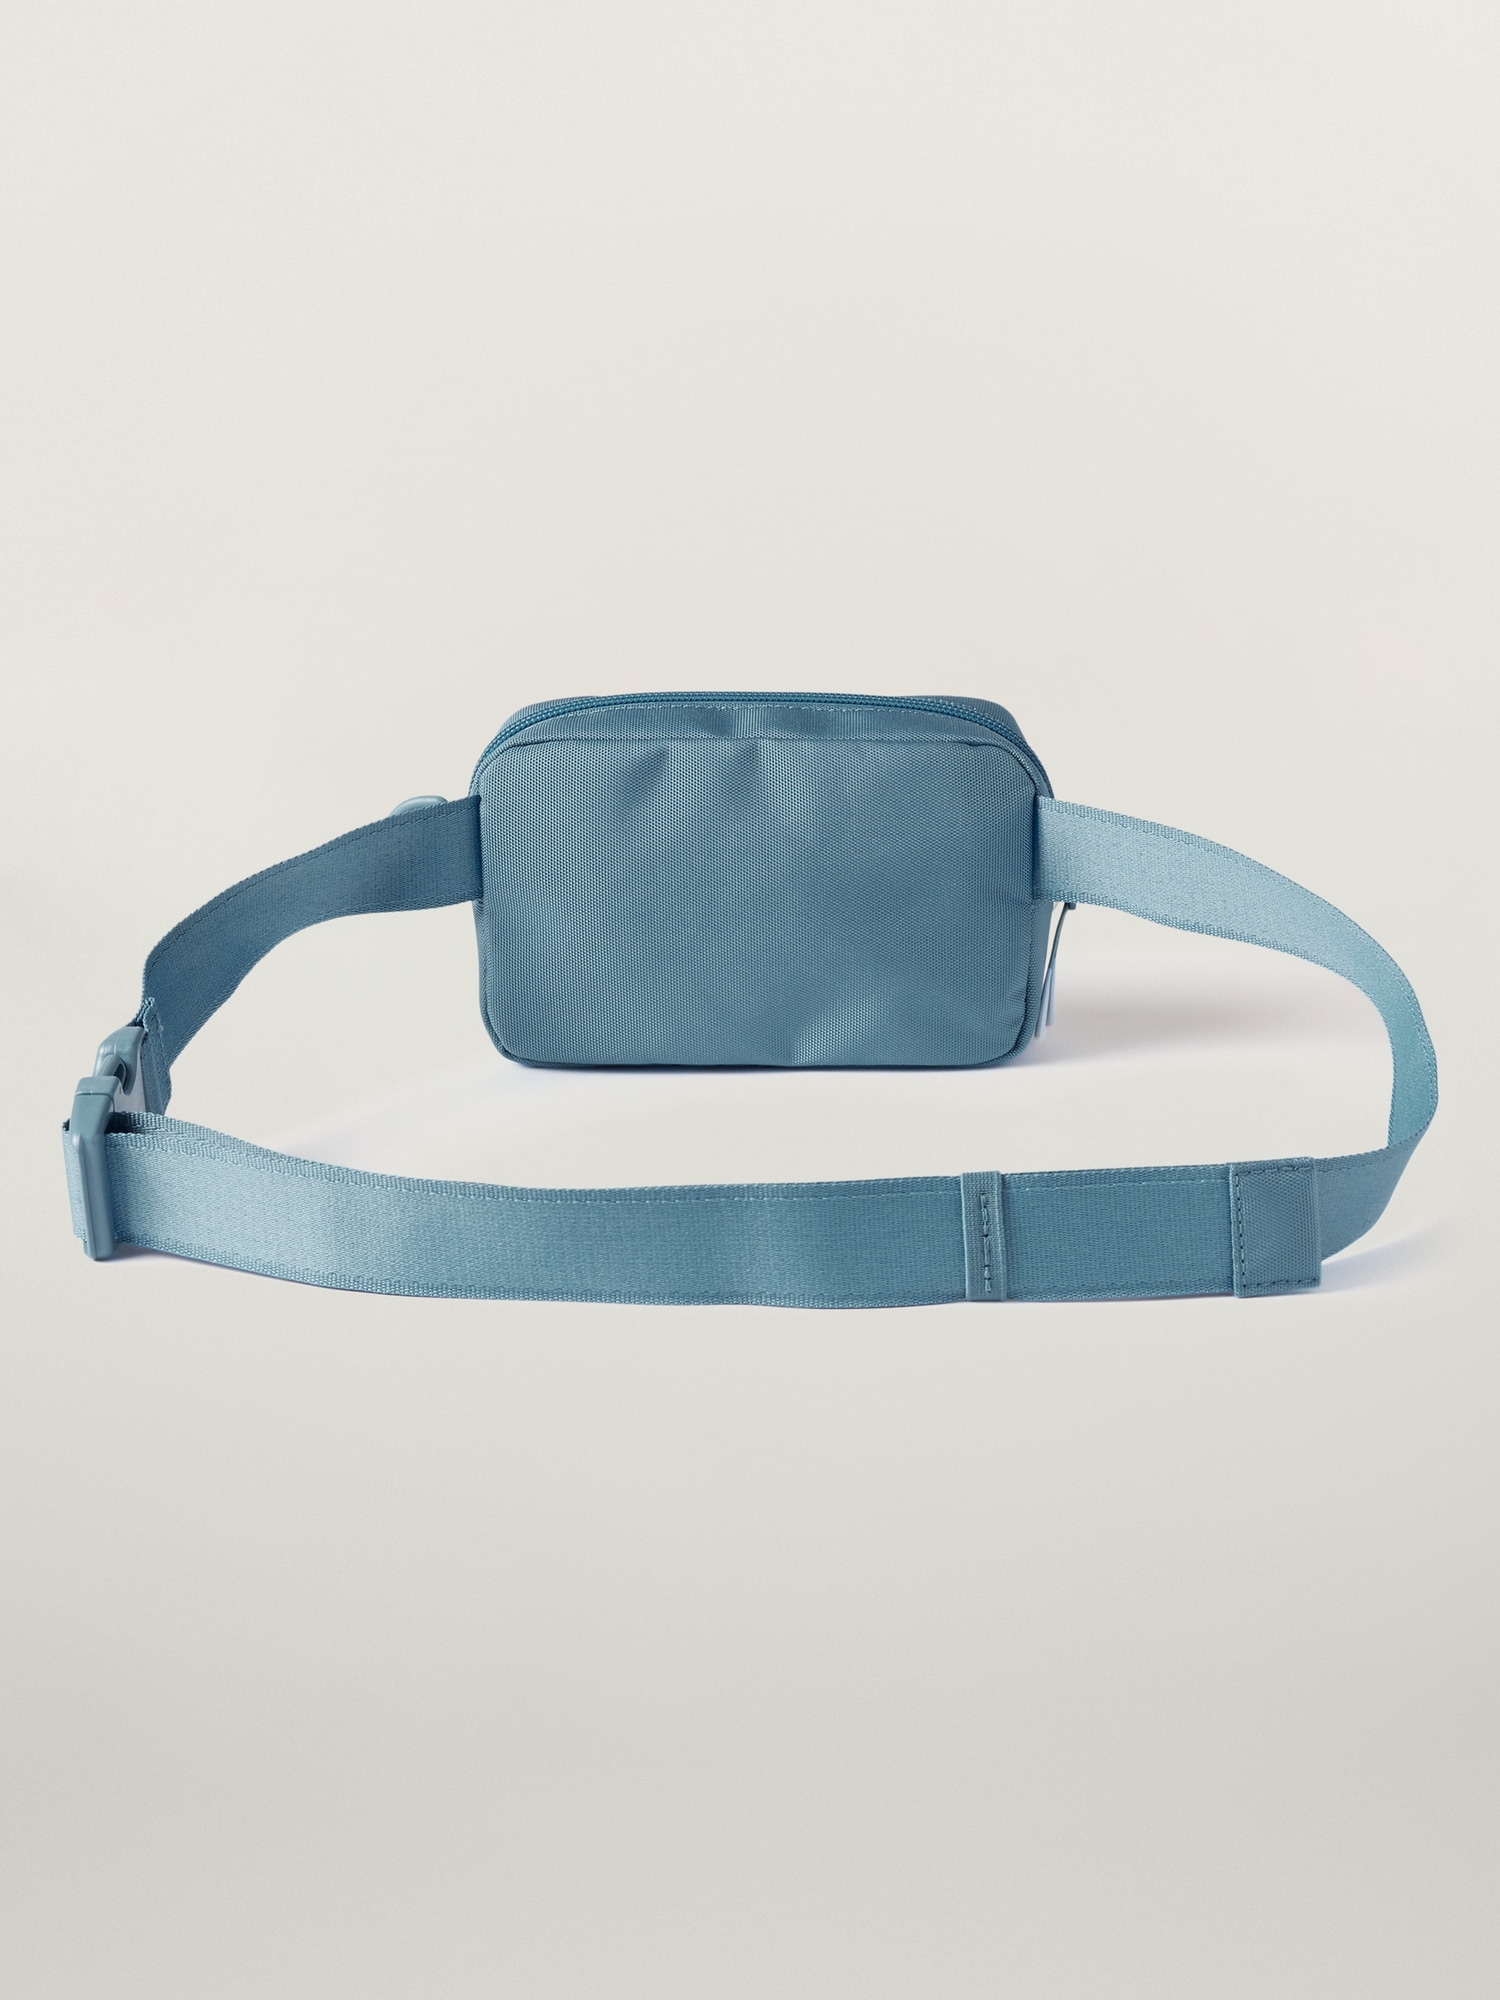 5 Lululemon Belt Bags My Teens and I Love, From $29